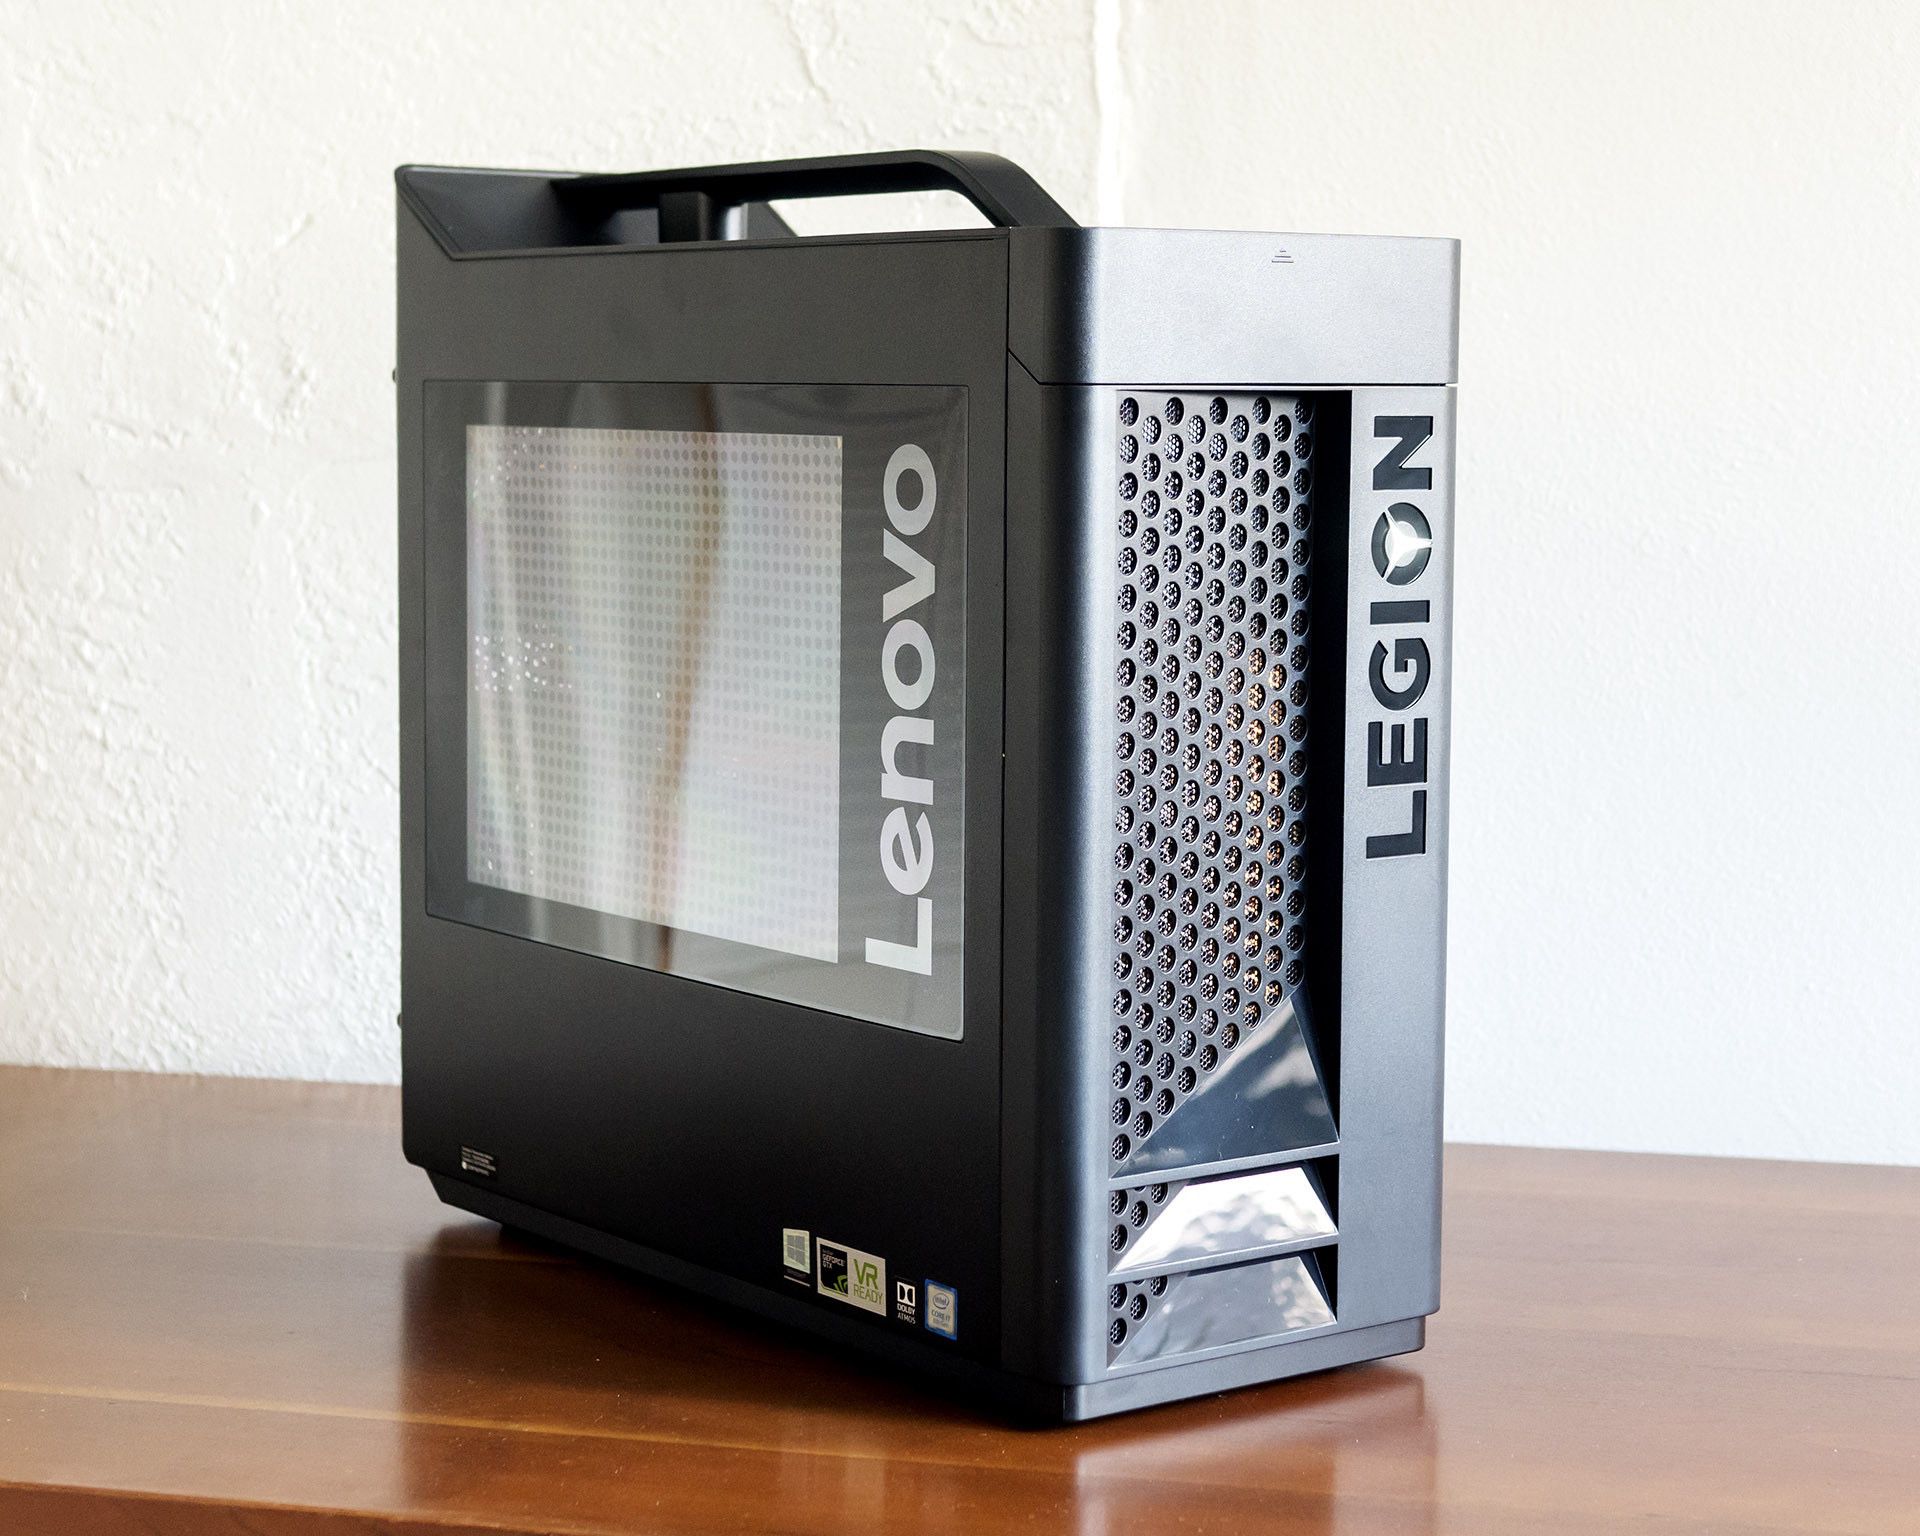 Lenovo Gaming Desktop comes with bonuses ask what they are